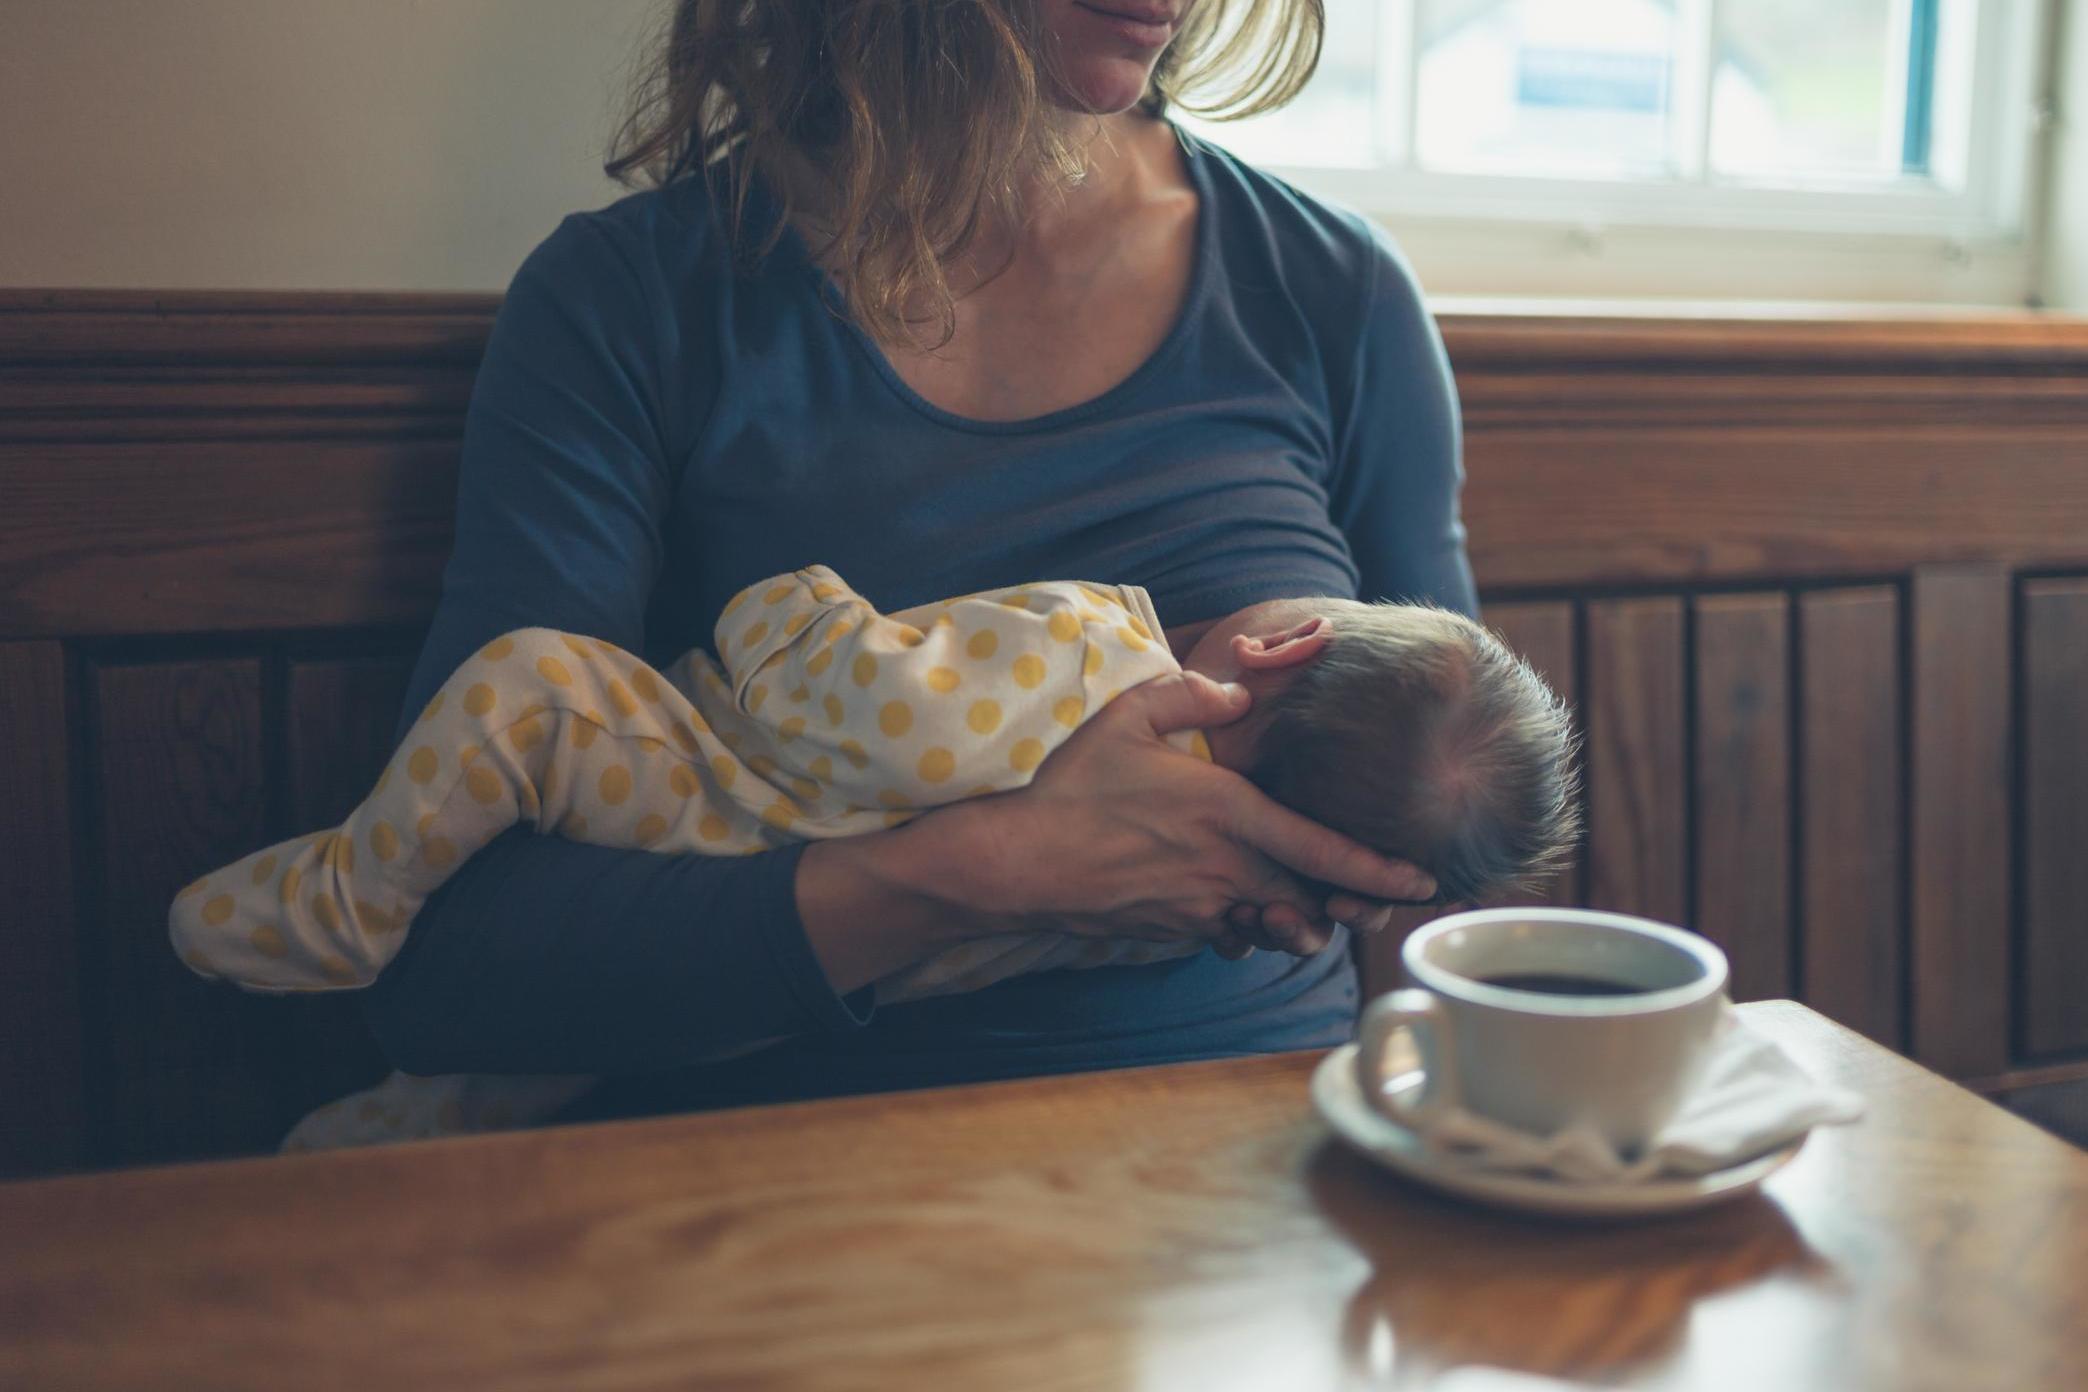 Breastfeeding taboo: Incorrect medication should not be a barrier